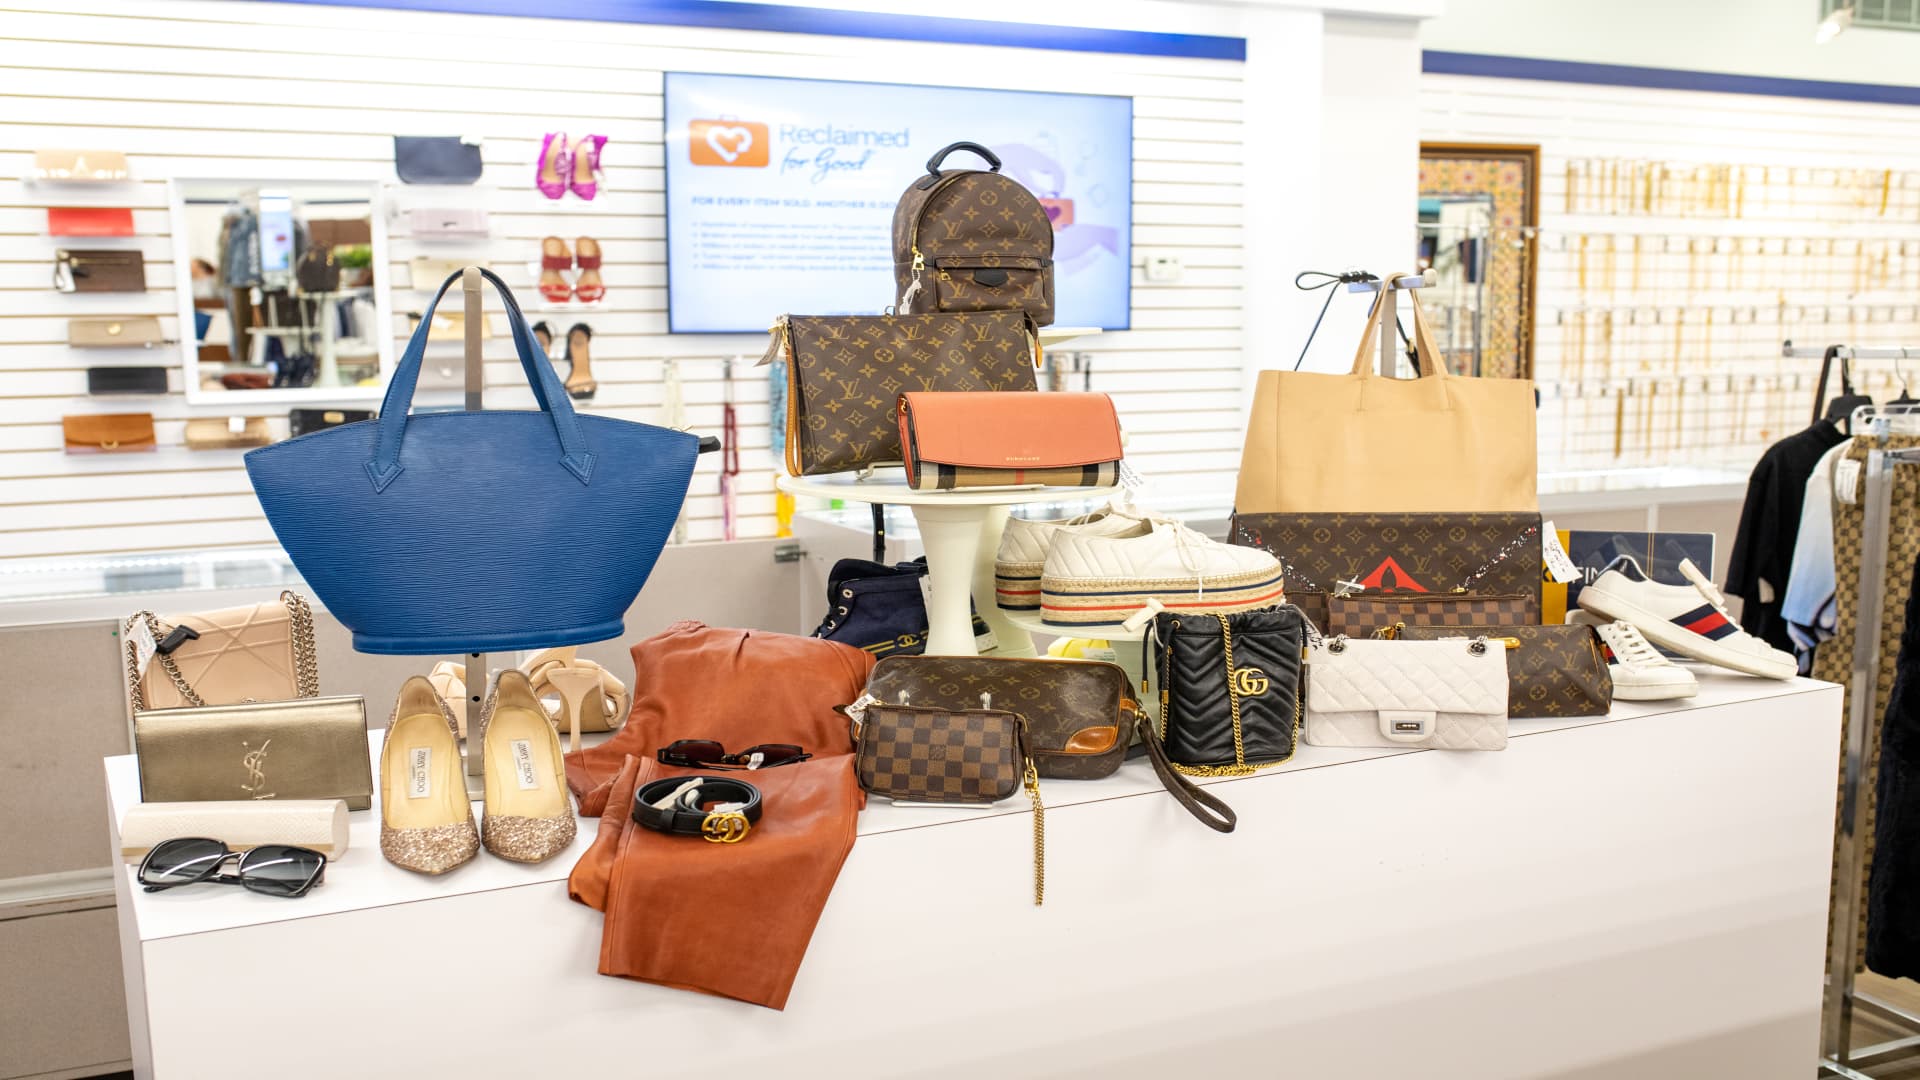 Luxury goods — from brands like Louis Vuitton, Jimmy Choo and Yves Saint Laurent — on sale at Unclaimed Baggage's retail store in Scottsboro, Alabama.